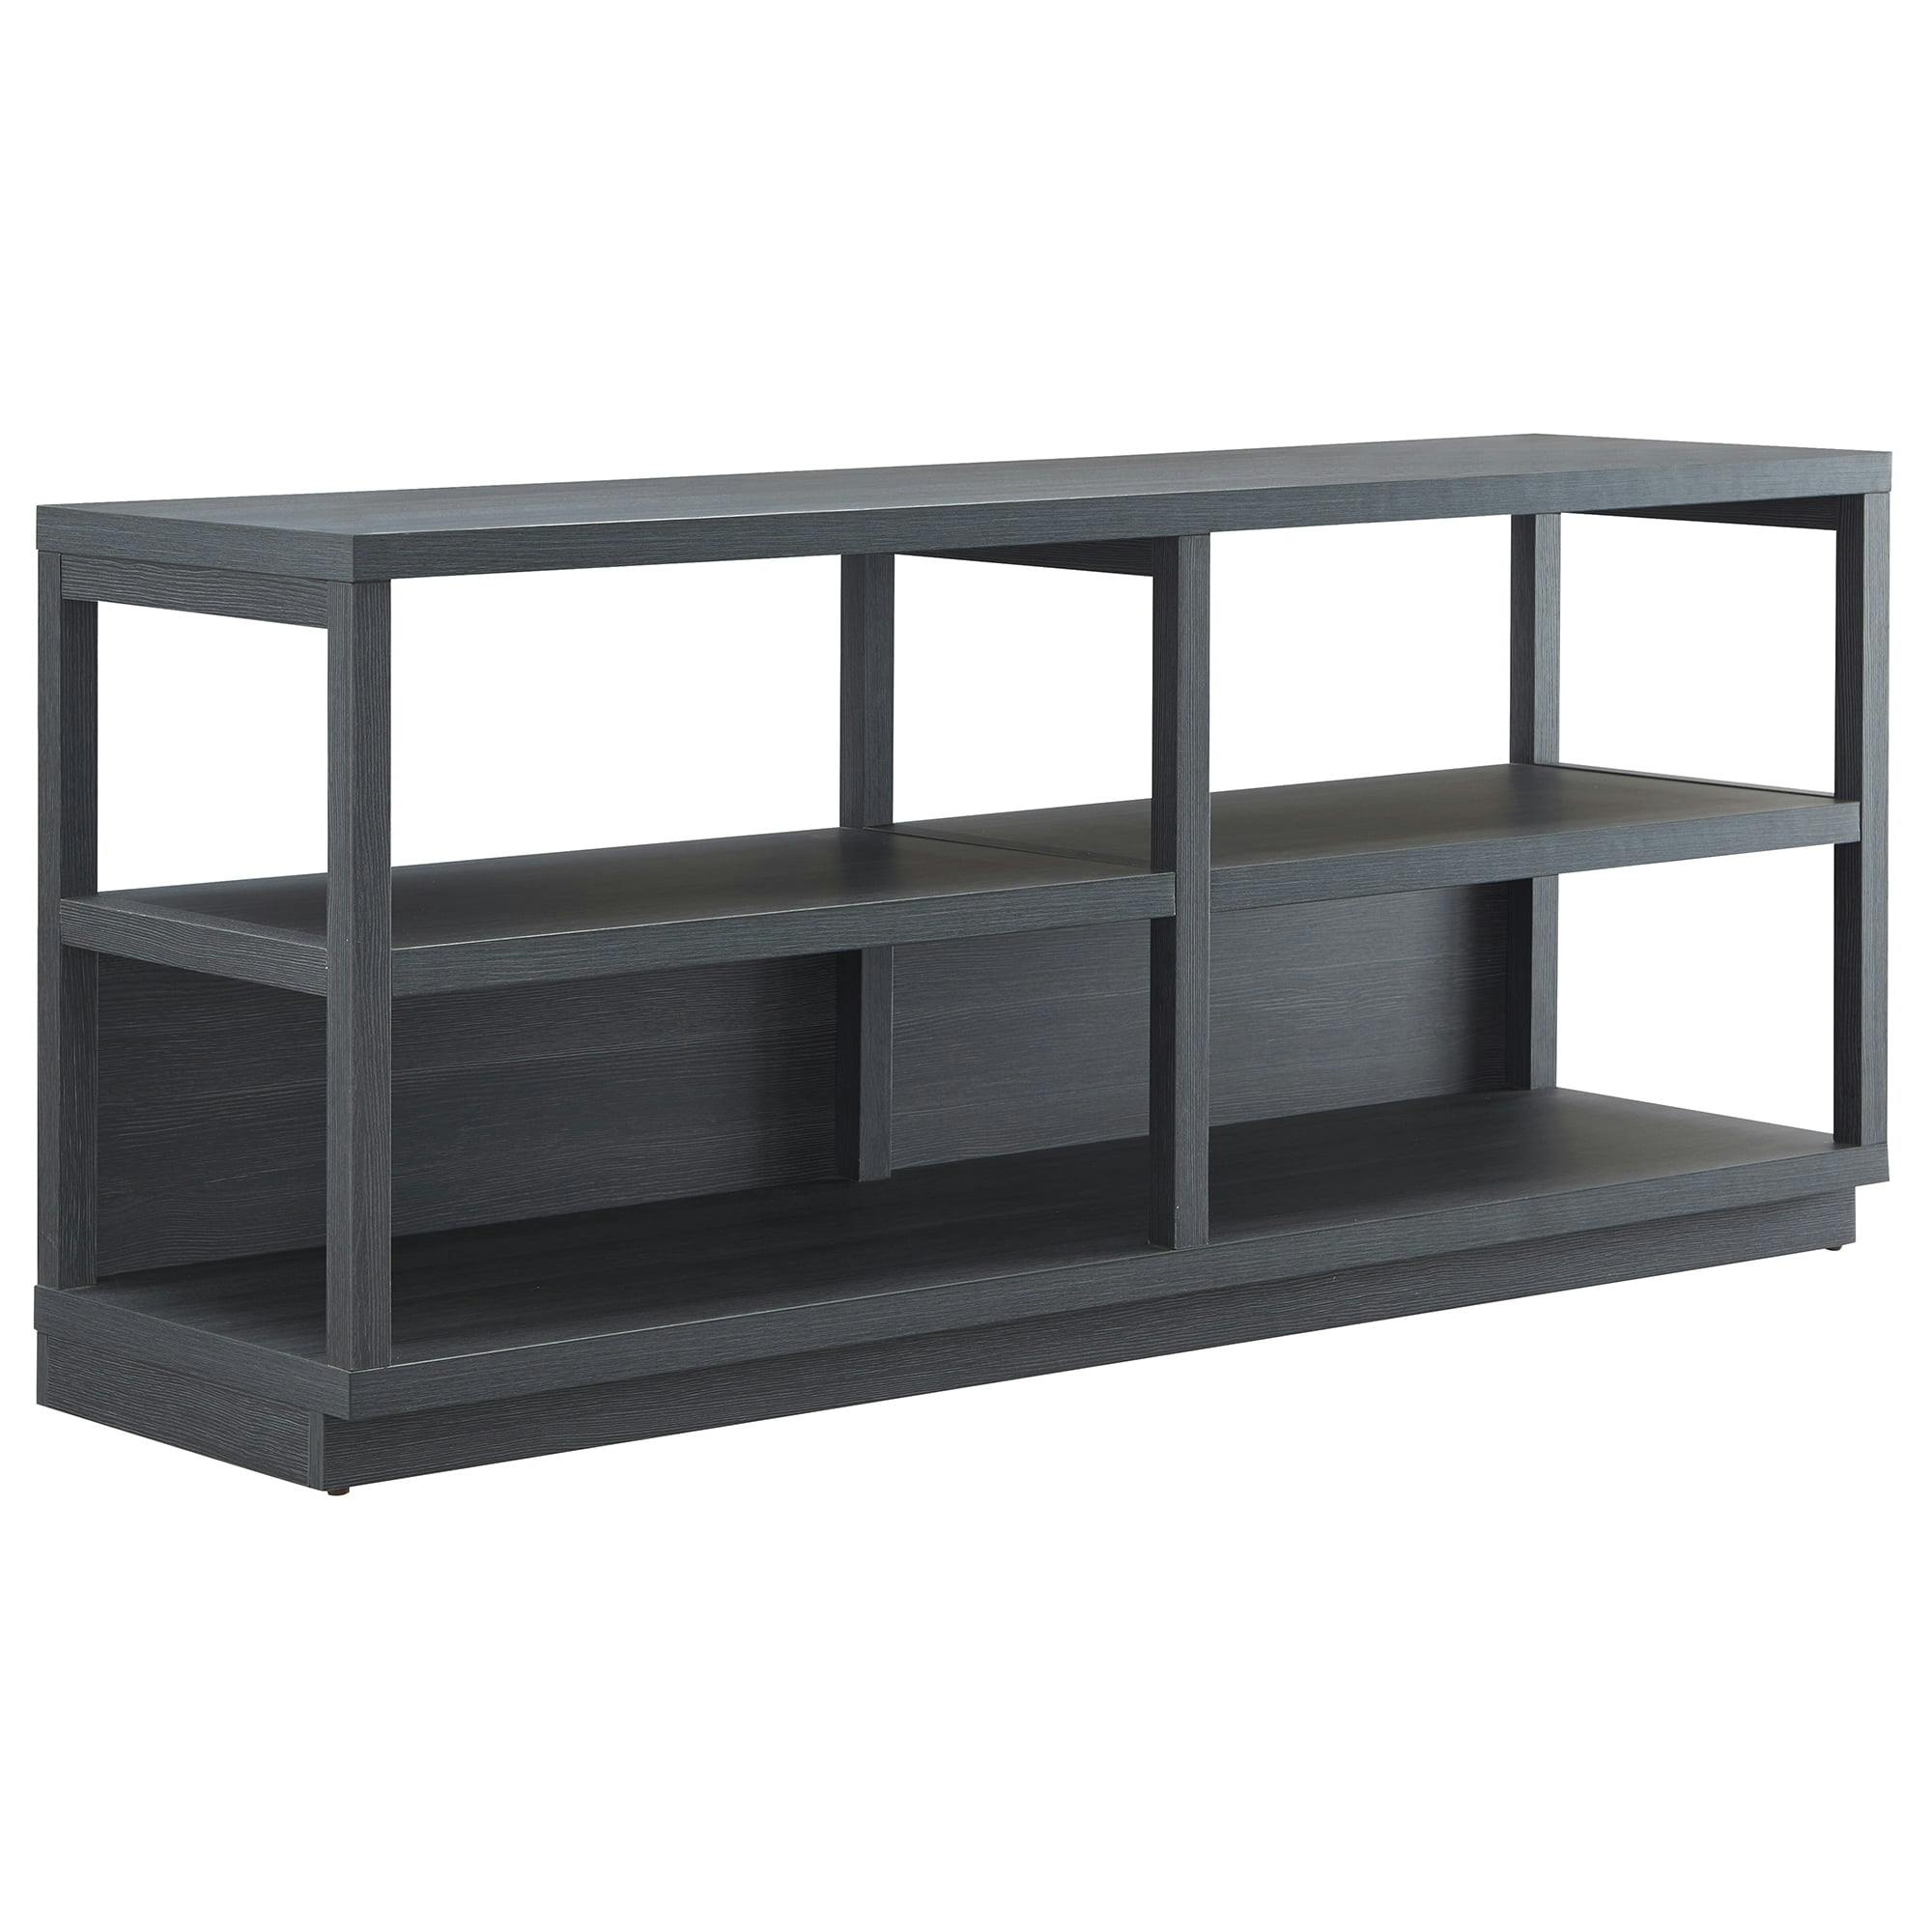 Thalia Charcoal Gray Open Plan 55" MDF TV Stand